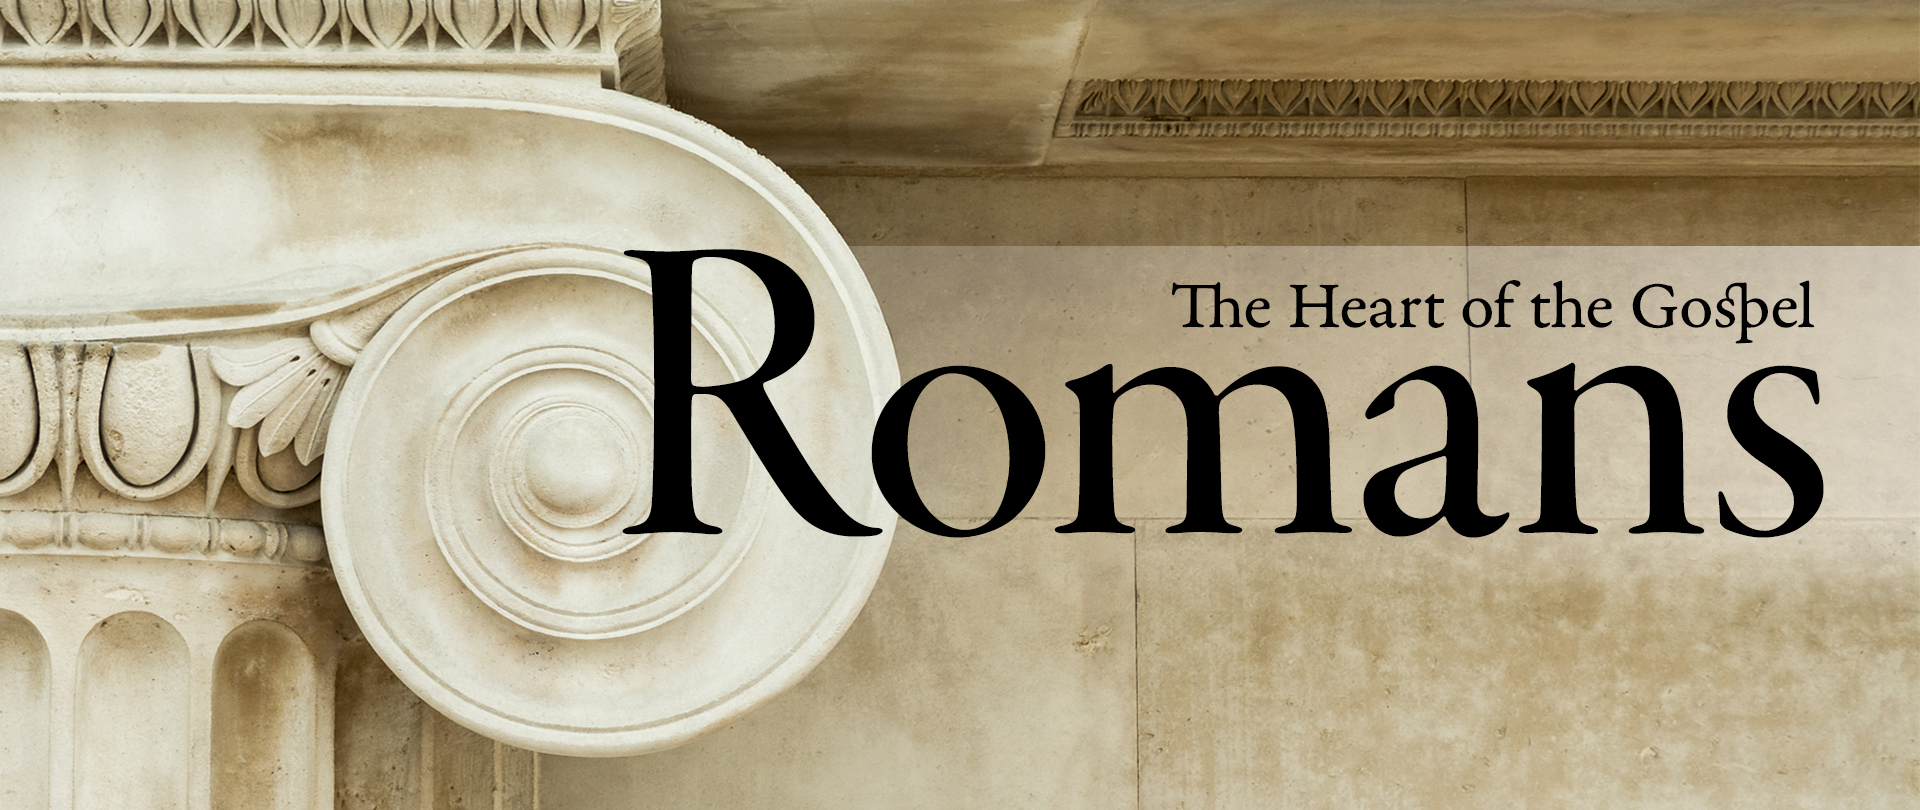 Romans
Experience the power of the Gospel
Complete series now available online
